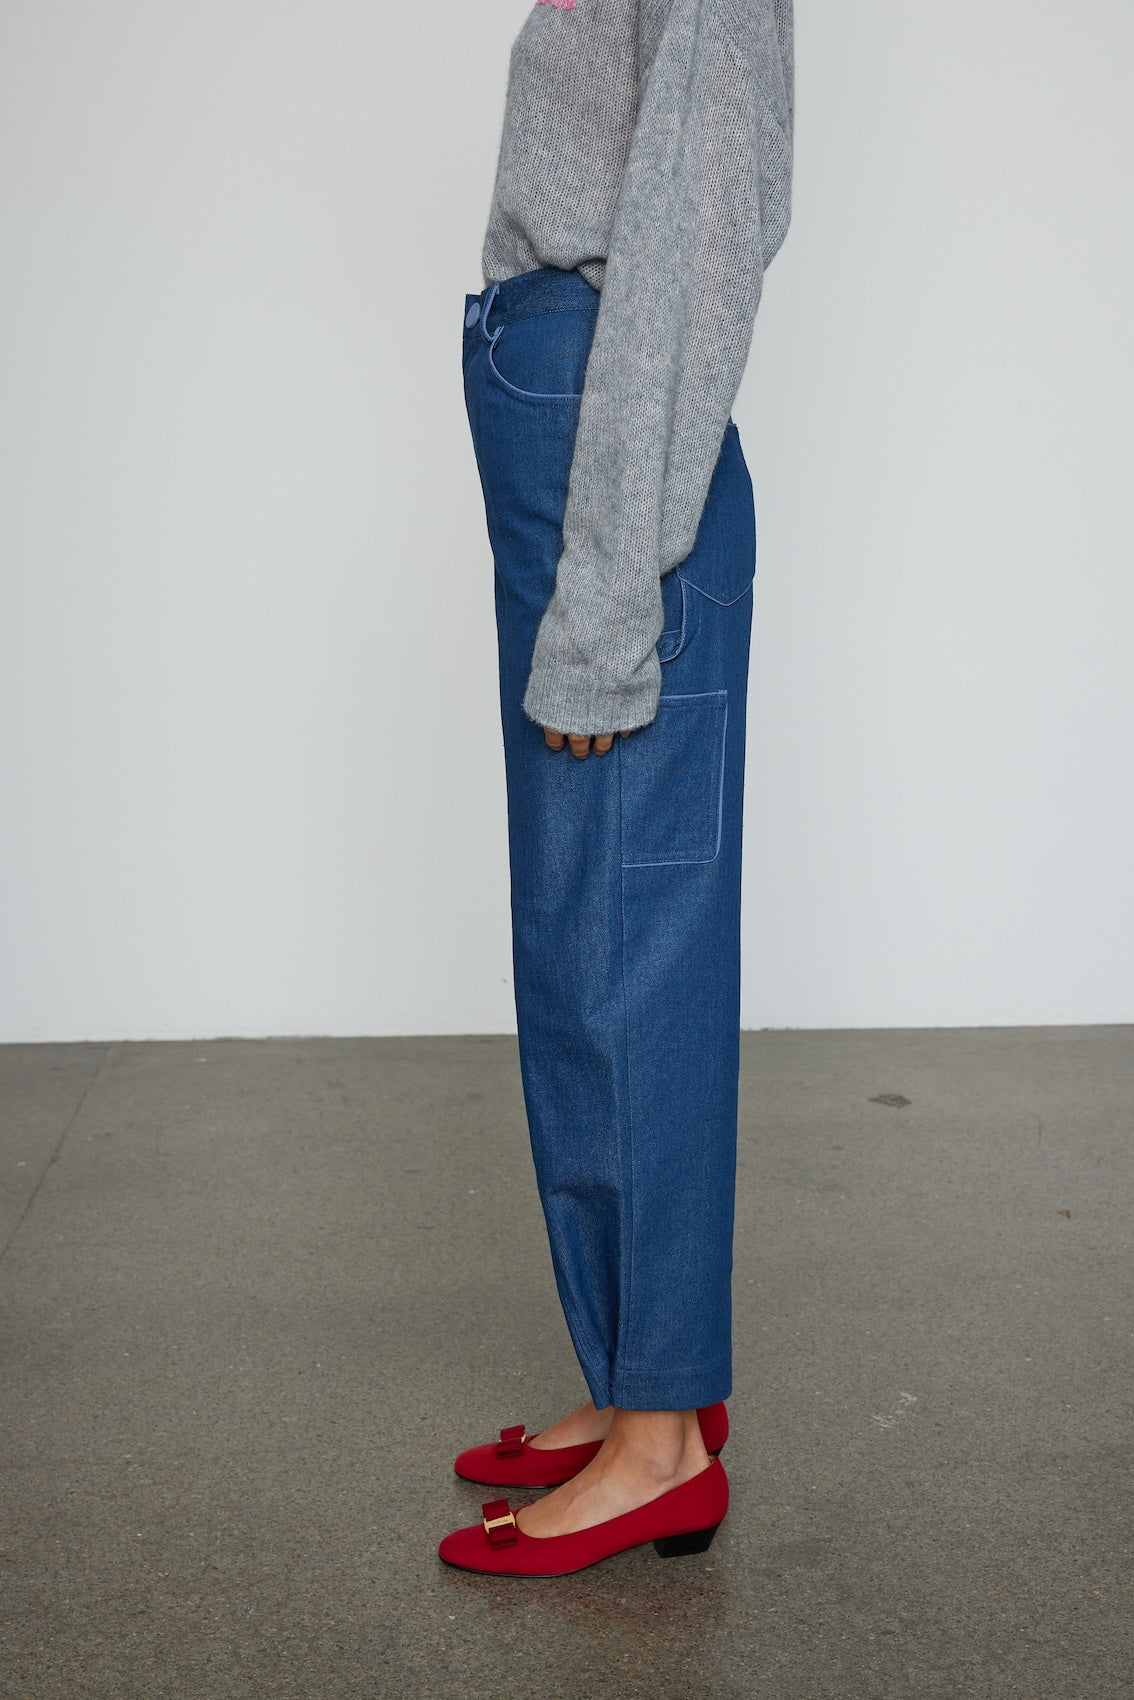 Caro Editions Emma Pants in Indigo Denim. The pants feature cargo details on the side and large pockets with piping details in a contrasting color. Easily modify the shape of the pants with a button adjustment. Style them with a t-shirt, blouse, or a matching Emma Jacket.